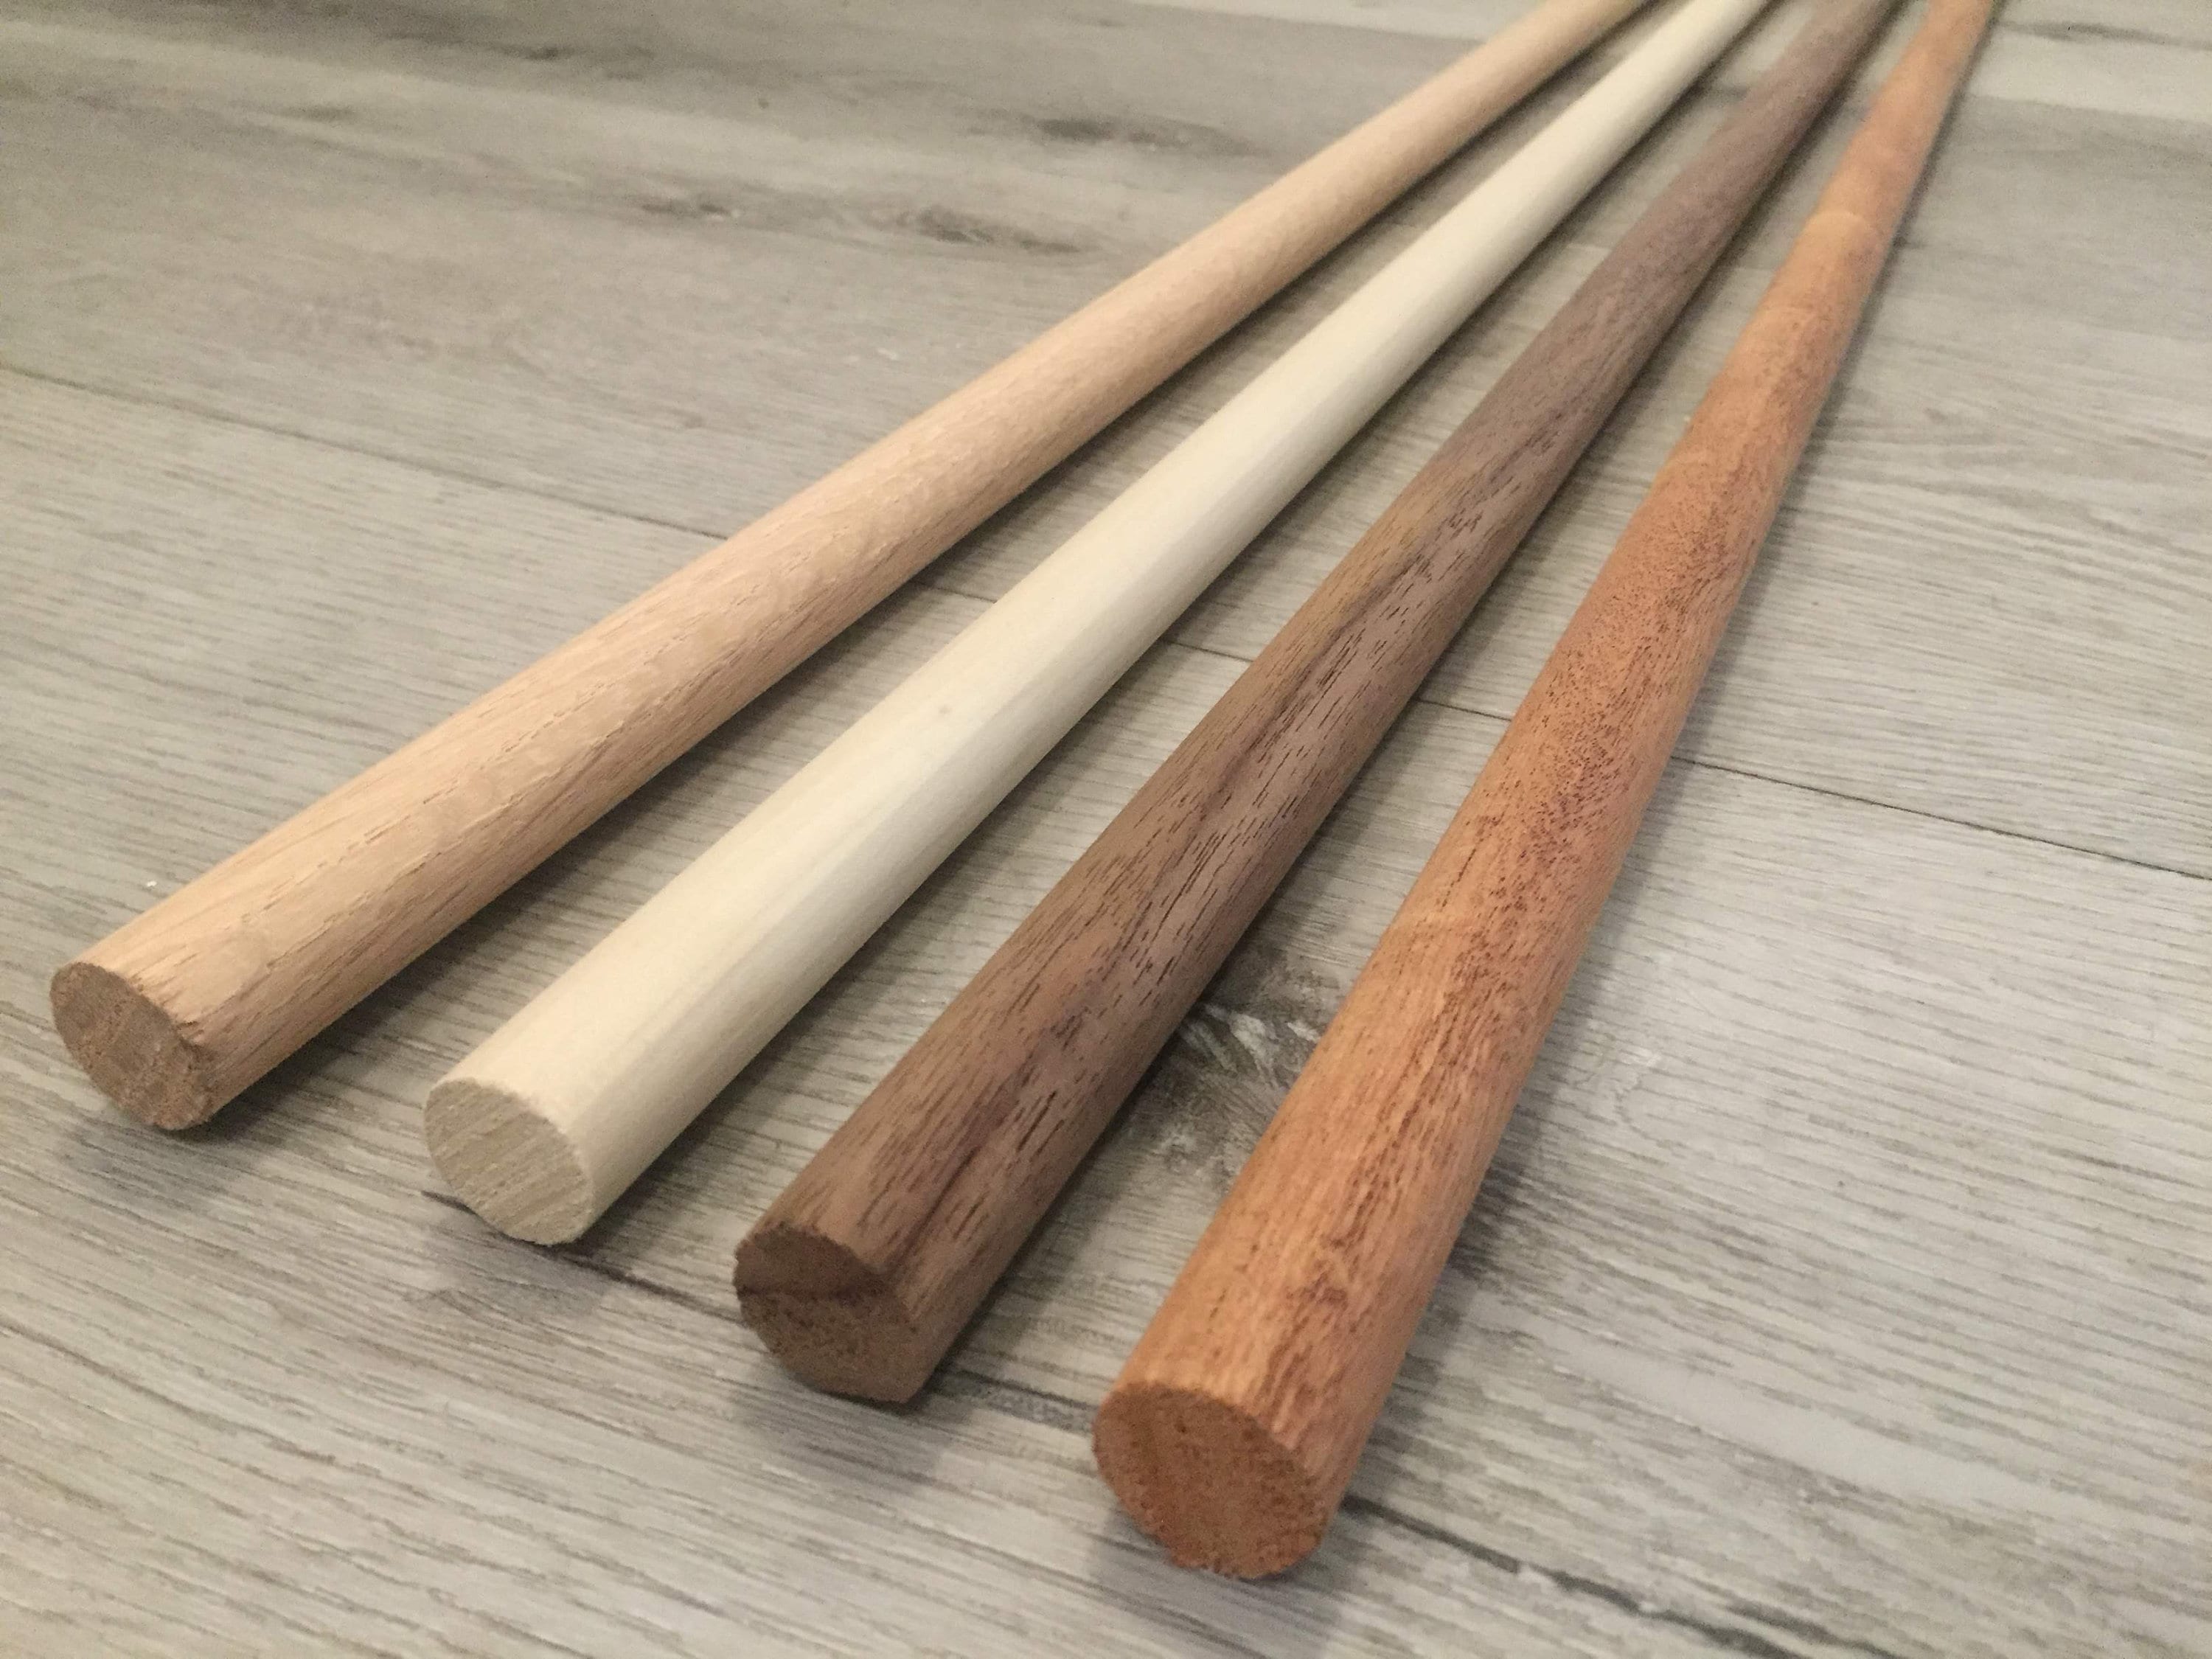 3/4 Inch Maple Dowel Rod Sticks Unfinished Wood for Hobby Crafts